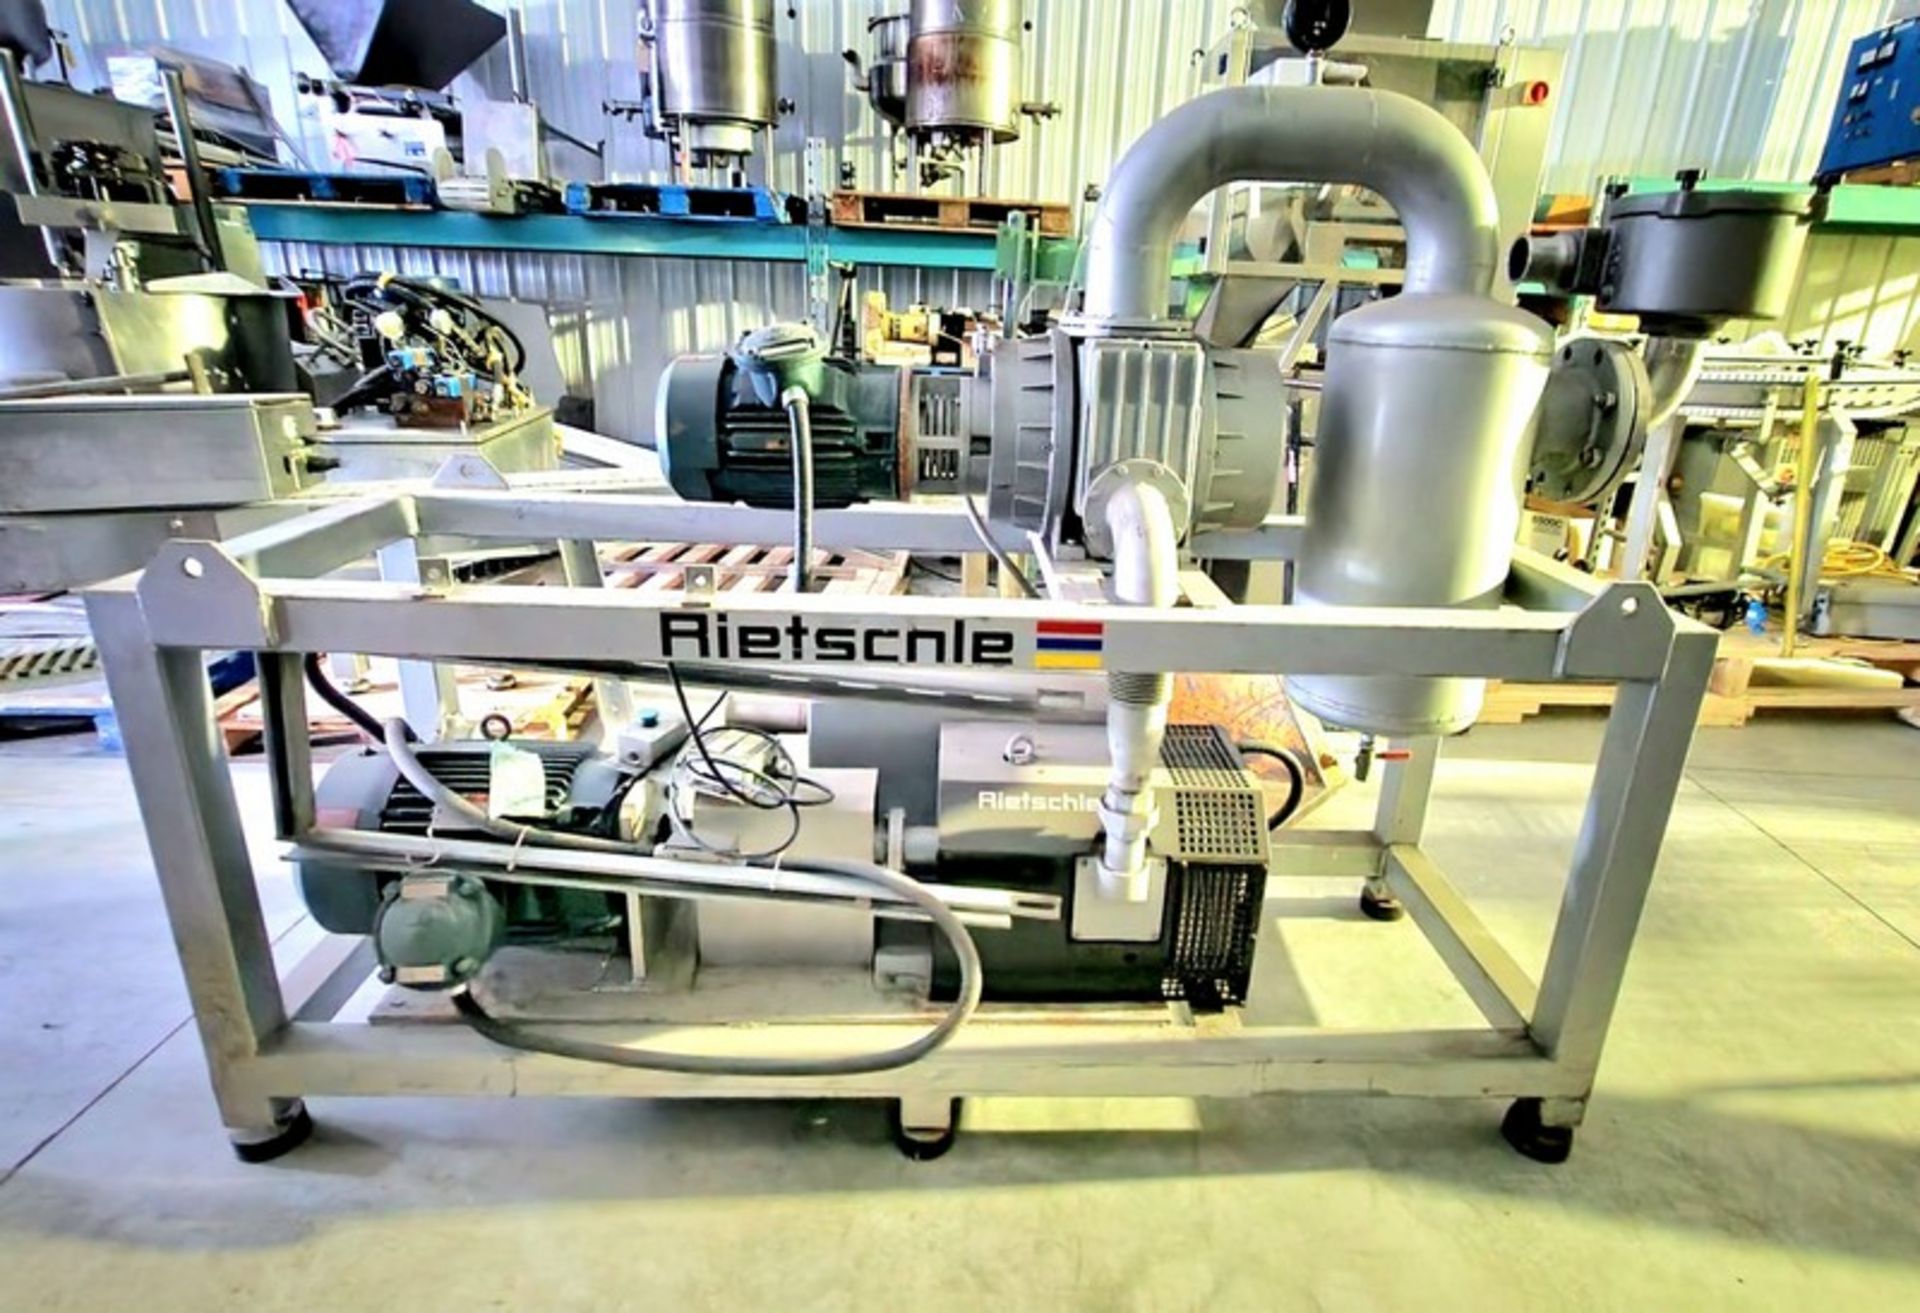 Rietschle Vacuum System modele VC300 01, 02567-0113 TYPE 1000 575volts / 5.20 / 3PH /60Hz 1 / SF 1, - Image 3 of 11